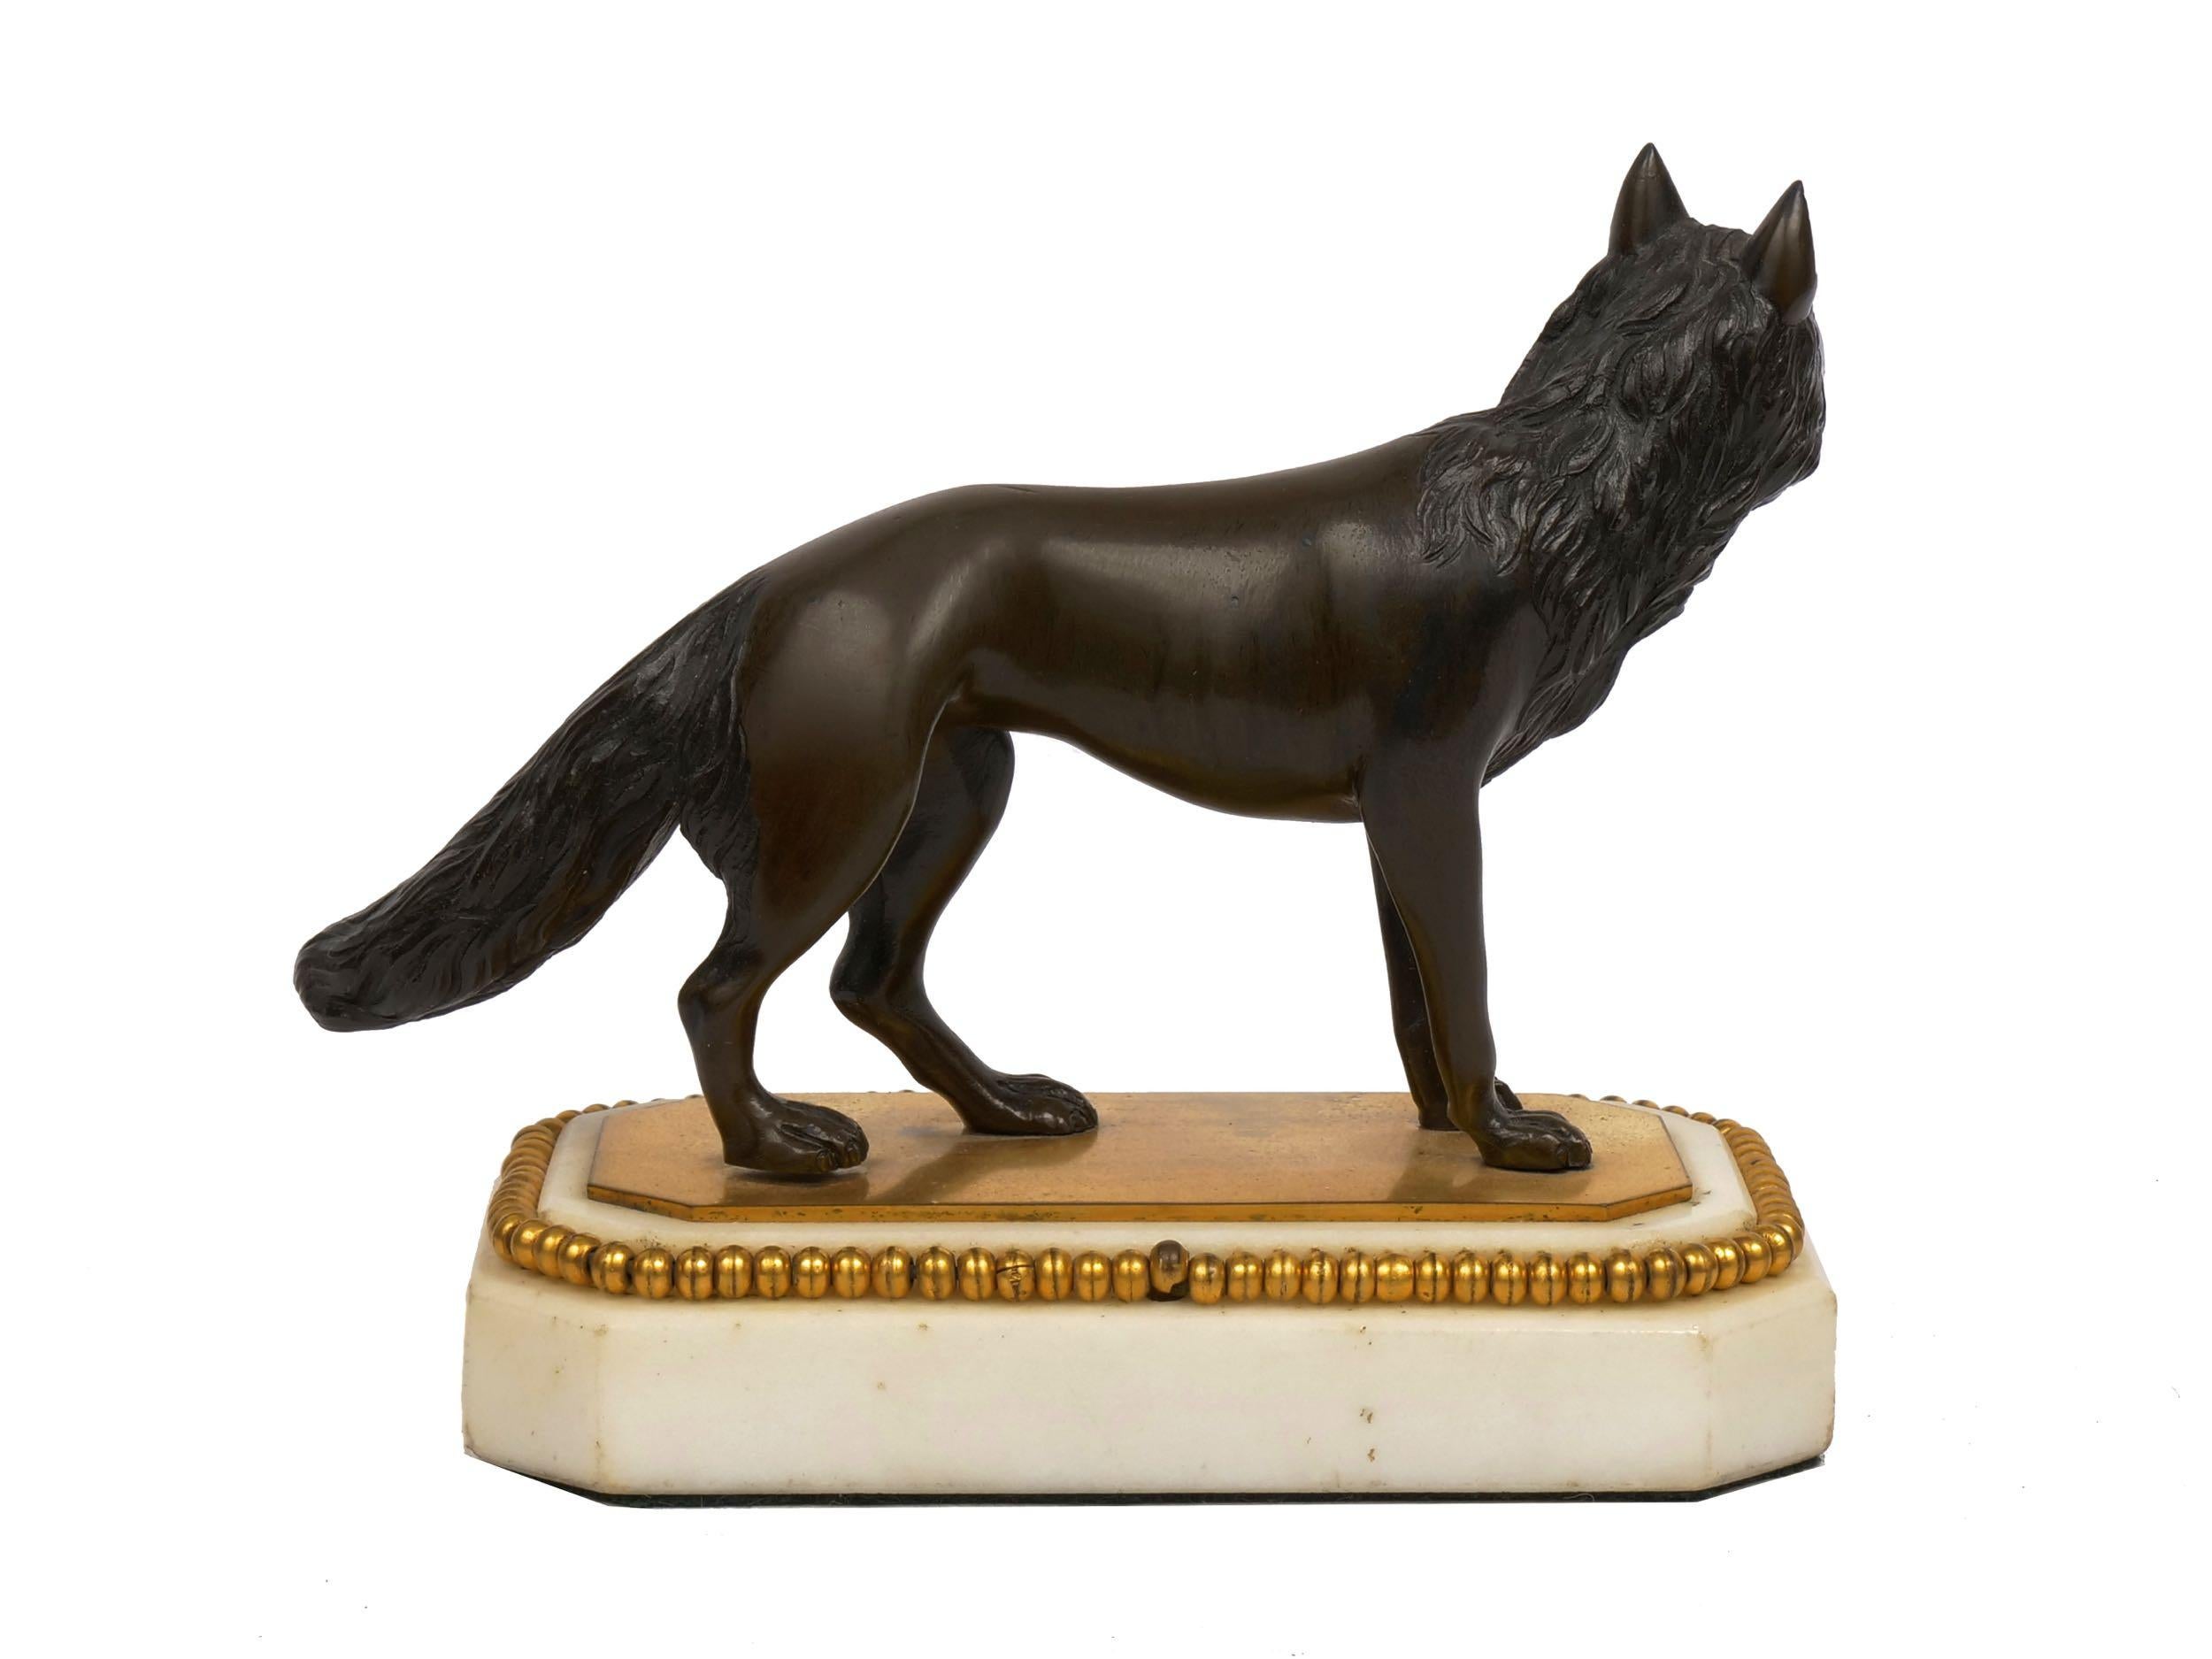 19th Century George III Bronze Fox Sculpture Antique Paperweight by Thomas Weeks, London 